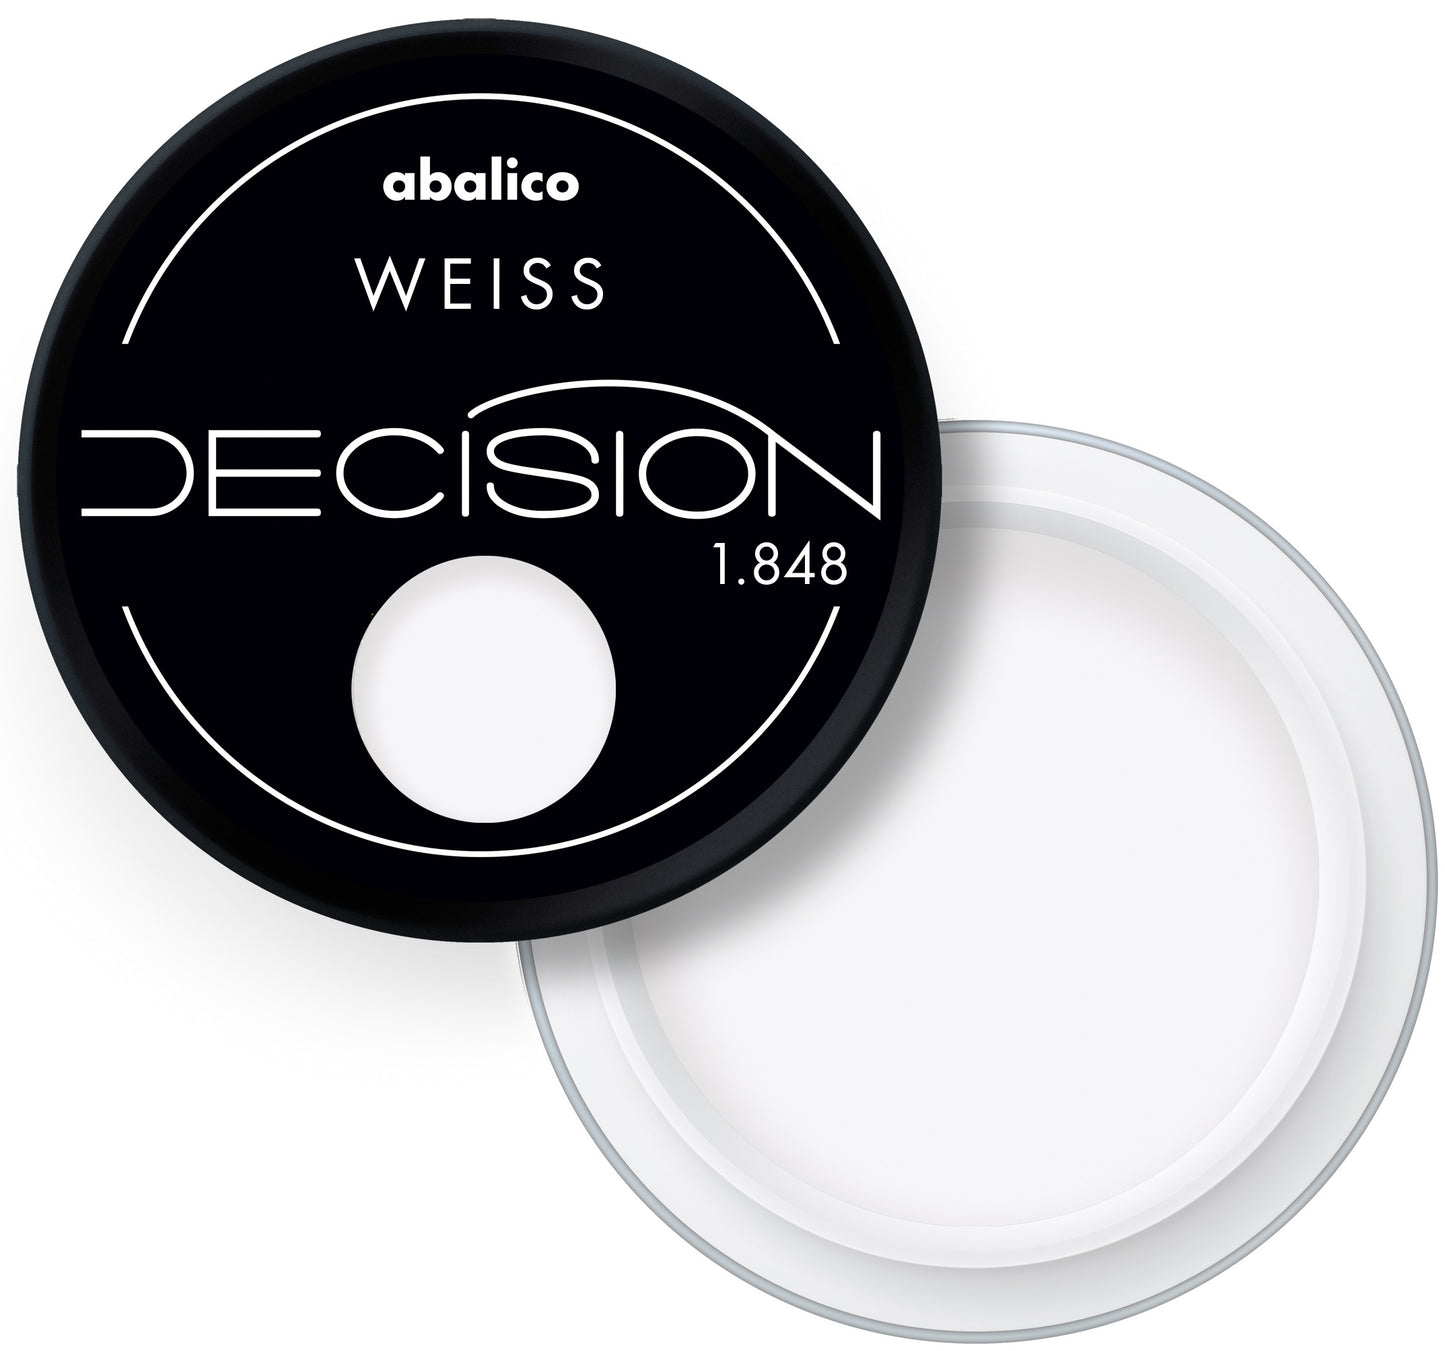 Abalico Colorgel weiss 5gr